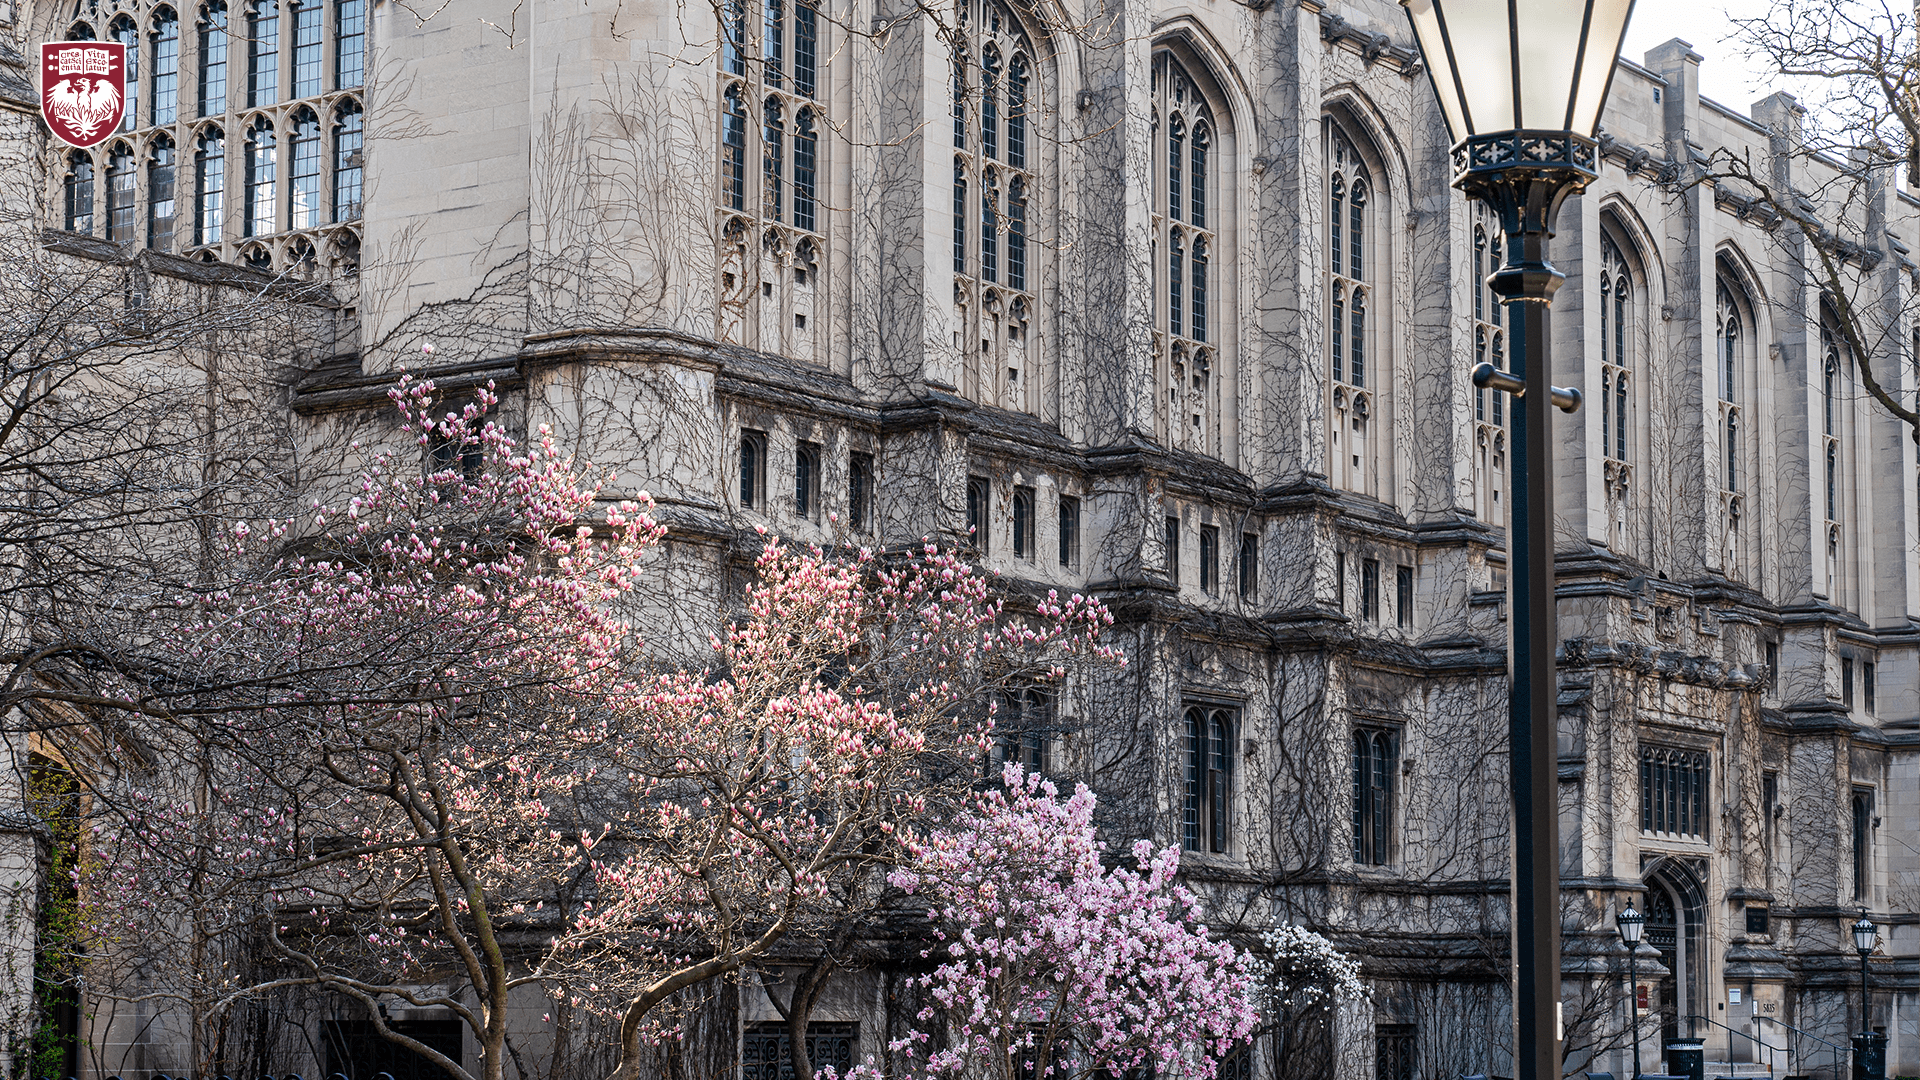 Trees with pink blooms in front of gothic architecture